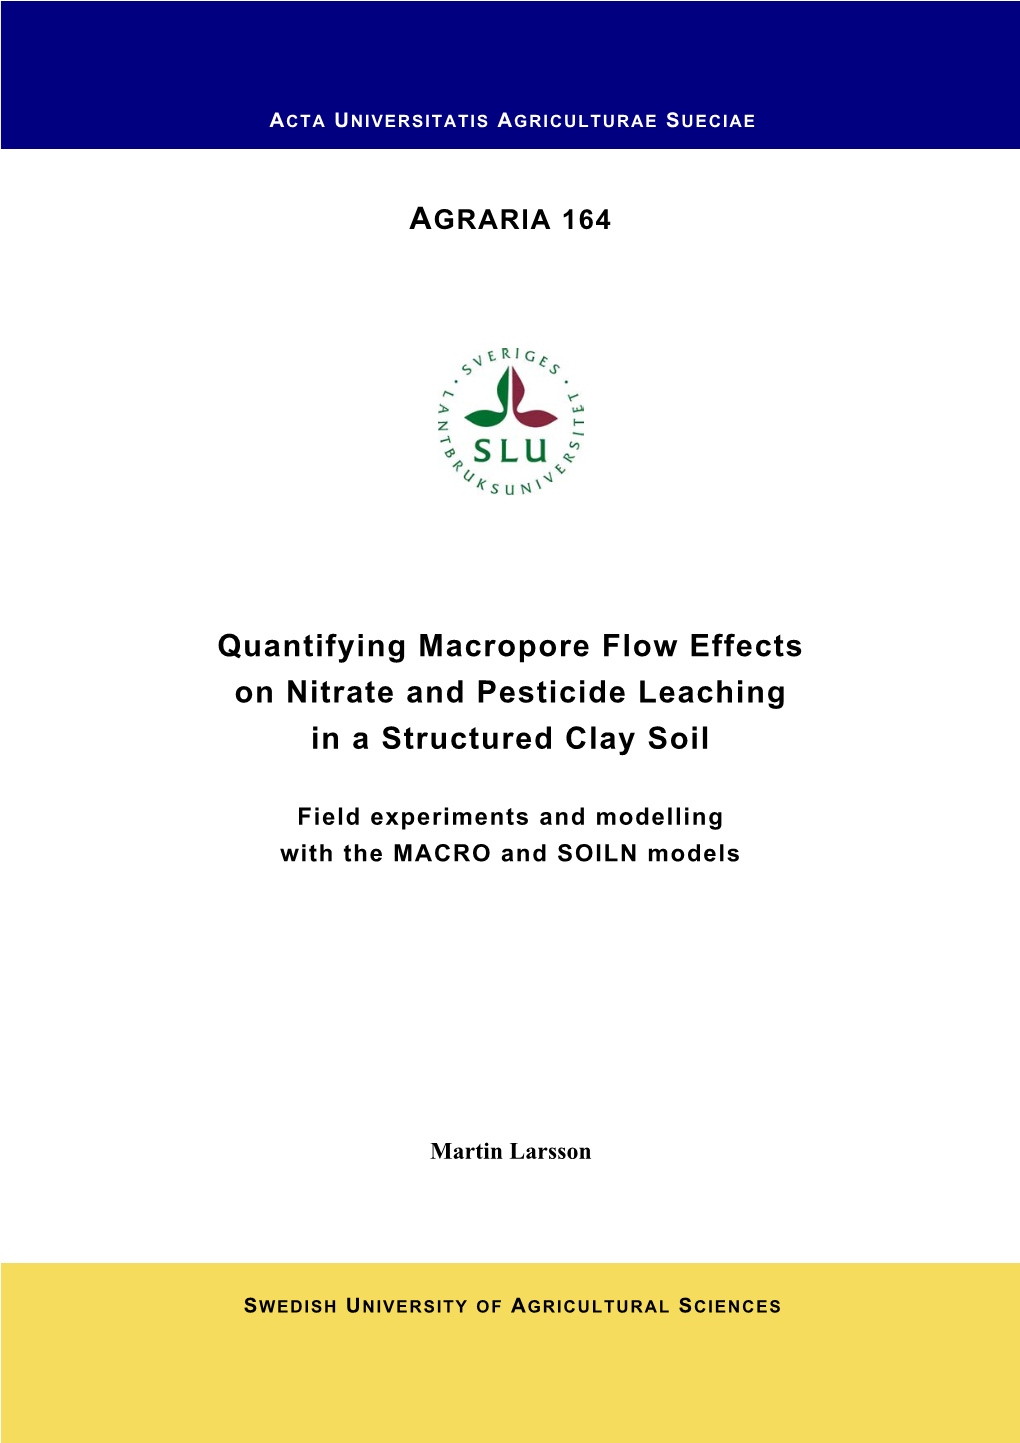 Quantifying Macropore Flow Effects on Nitrate and Pesticide Leaching in a Structured Clay Soil